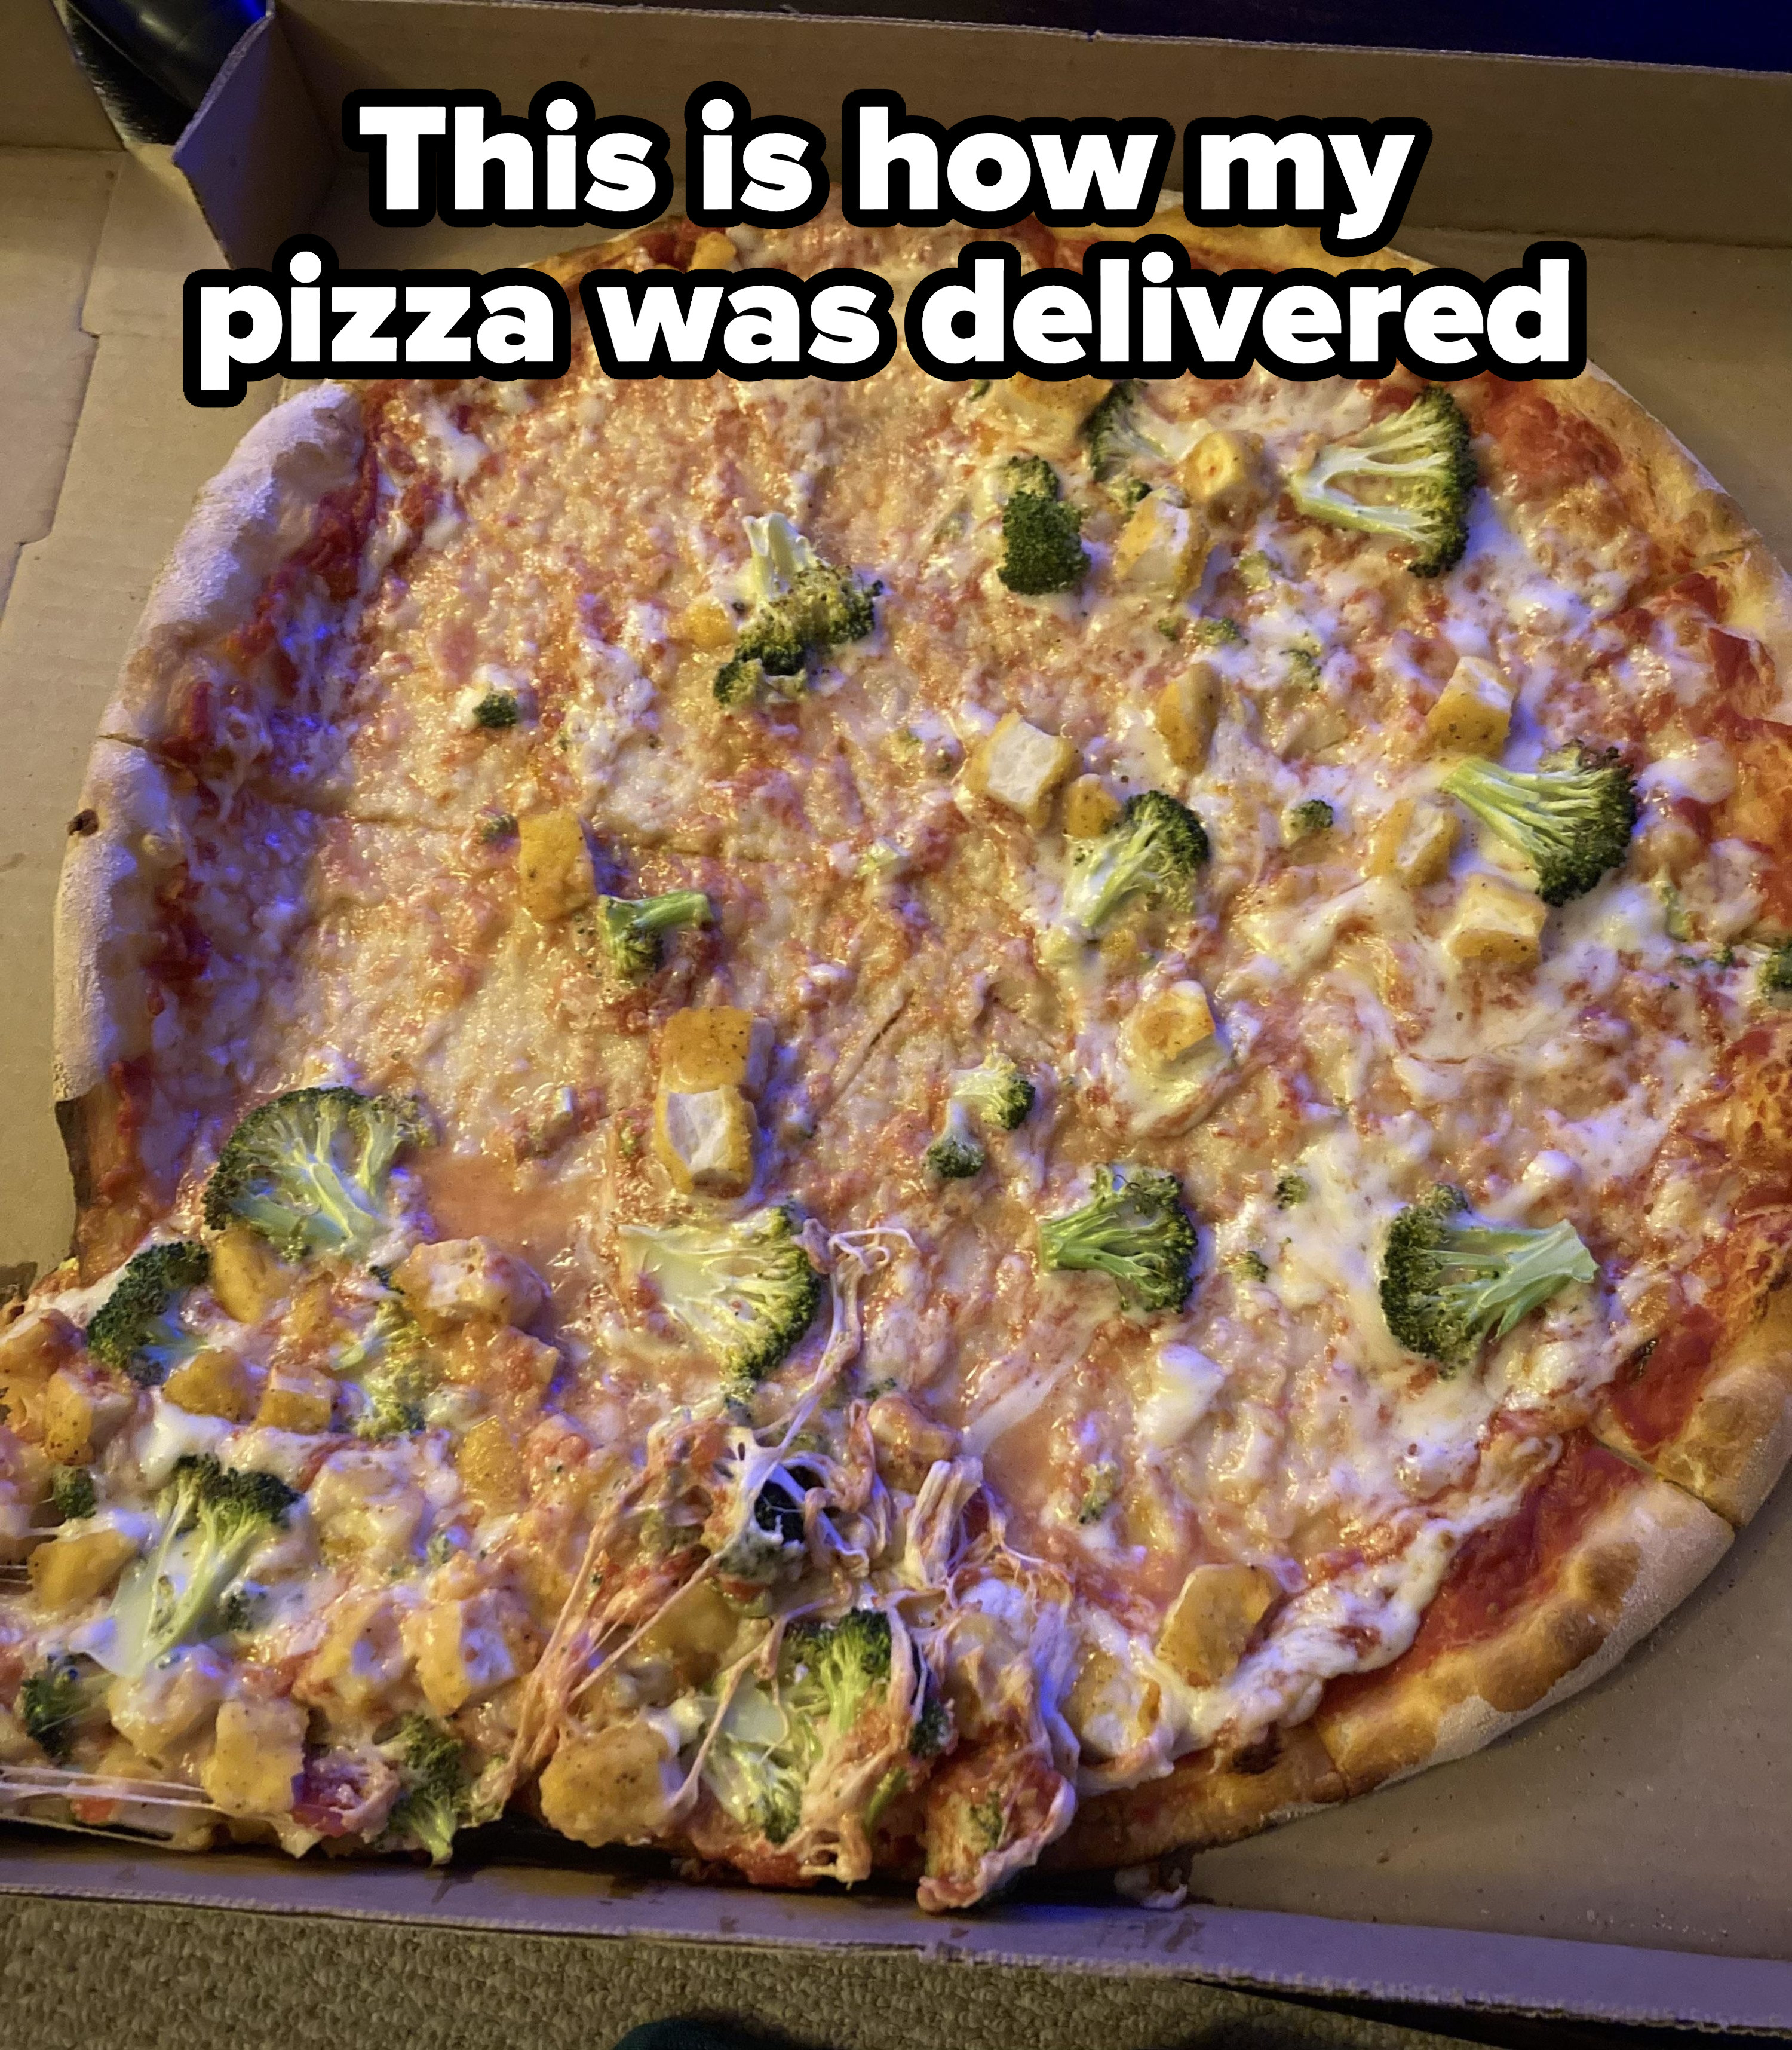 A pizza pie in the container with most of the toppings—cheese and broccoli—slid to the side